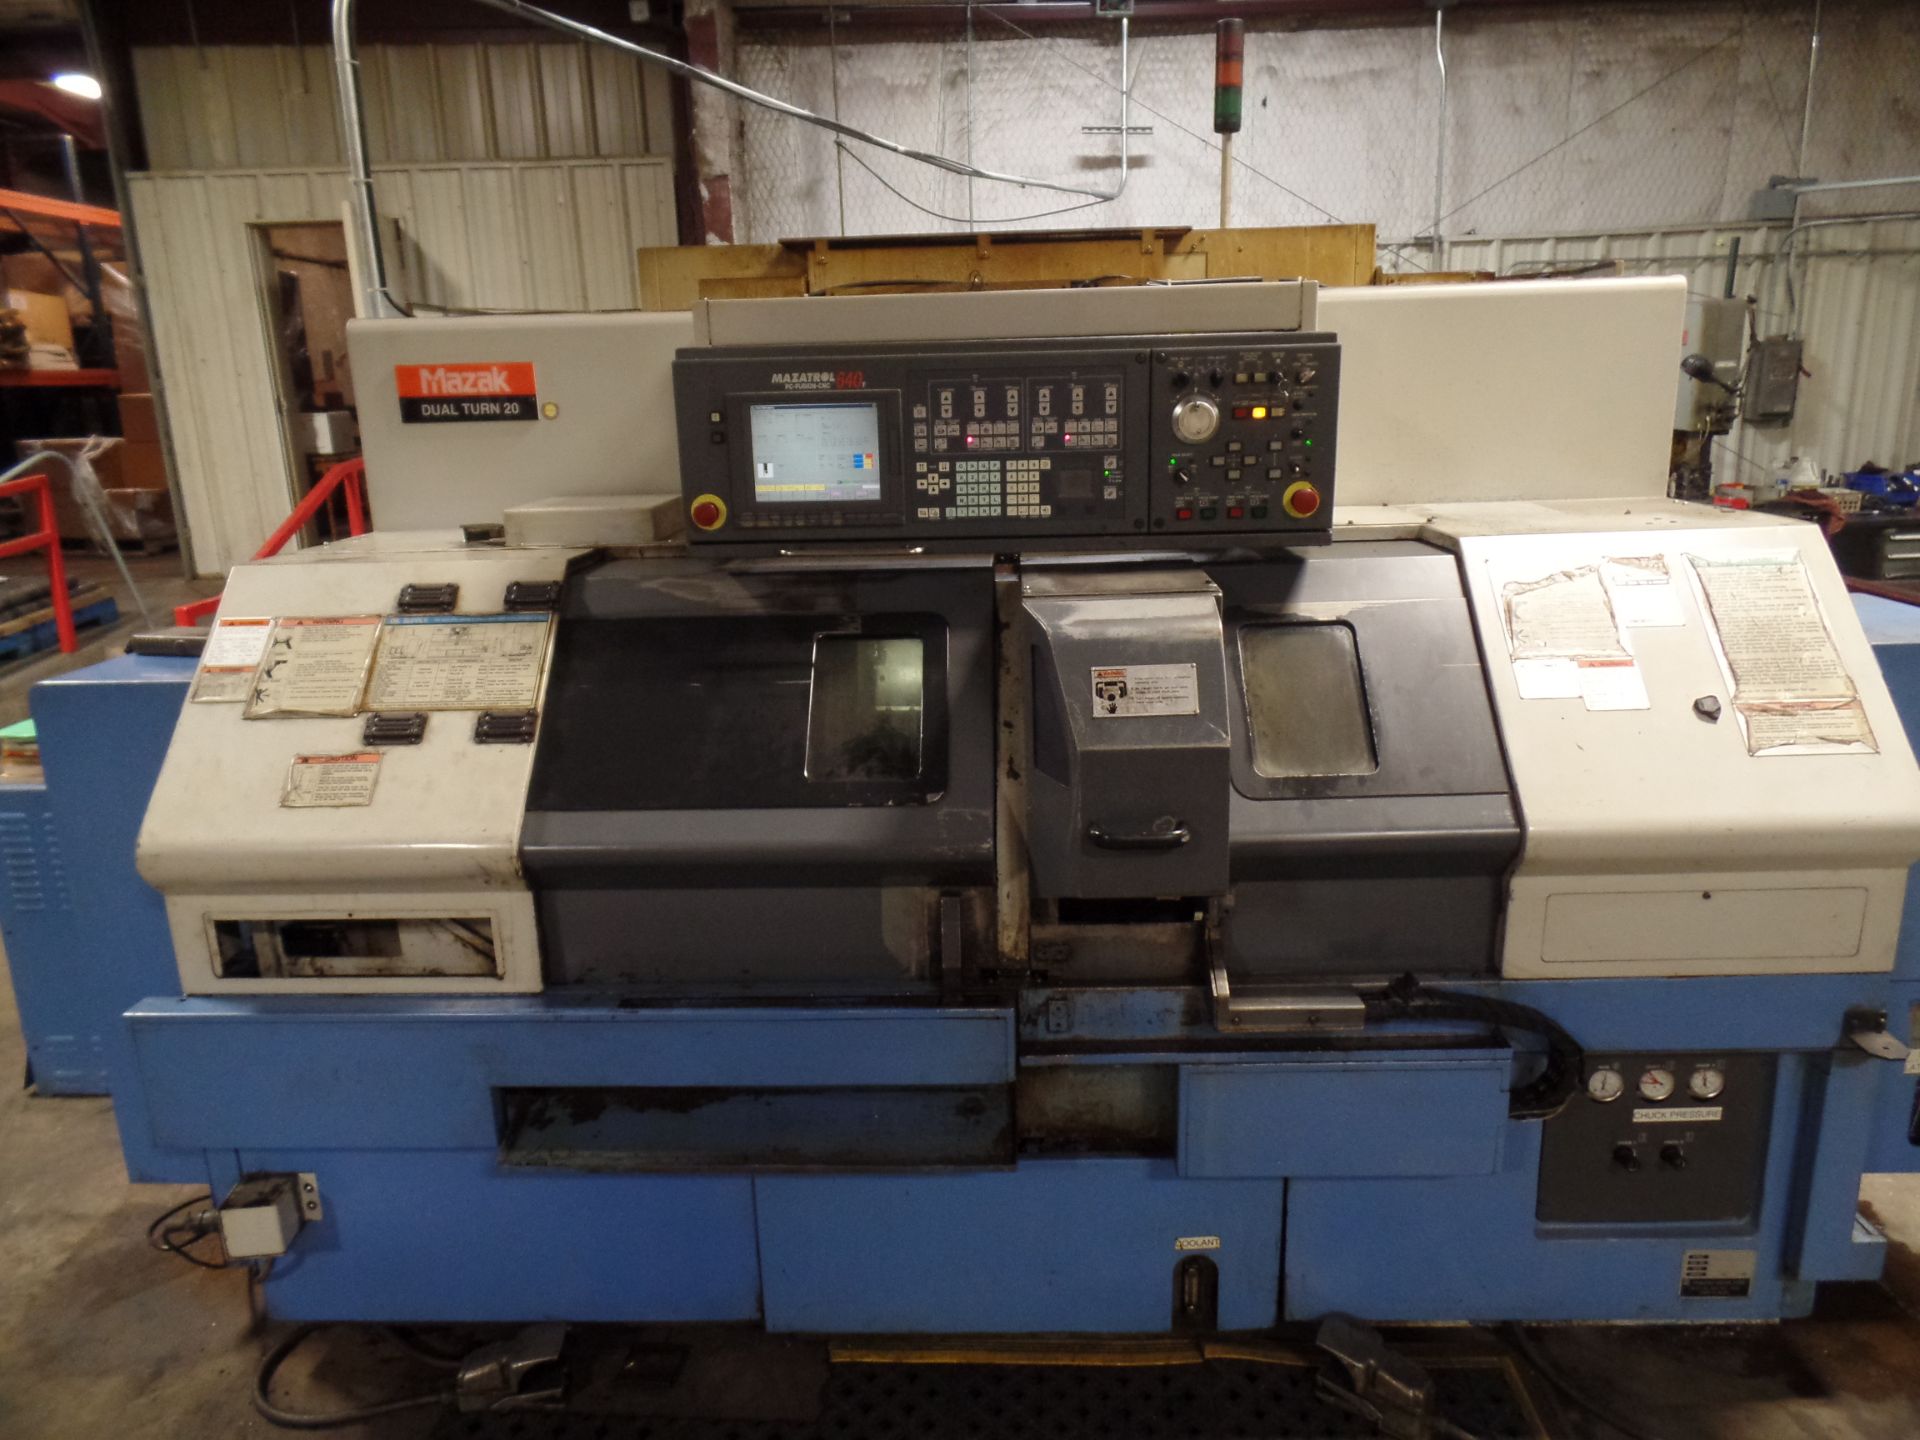 2002 Mazak Dual Turn 20 4 Axis Twin Spindle Twin Turret Opposed CNC Turning Center, rear discharge - Image 2 of 14